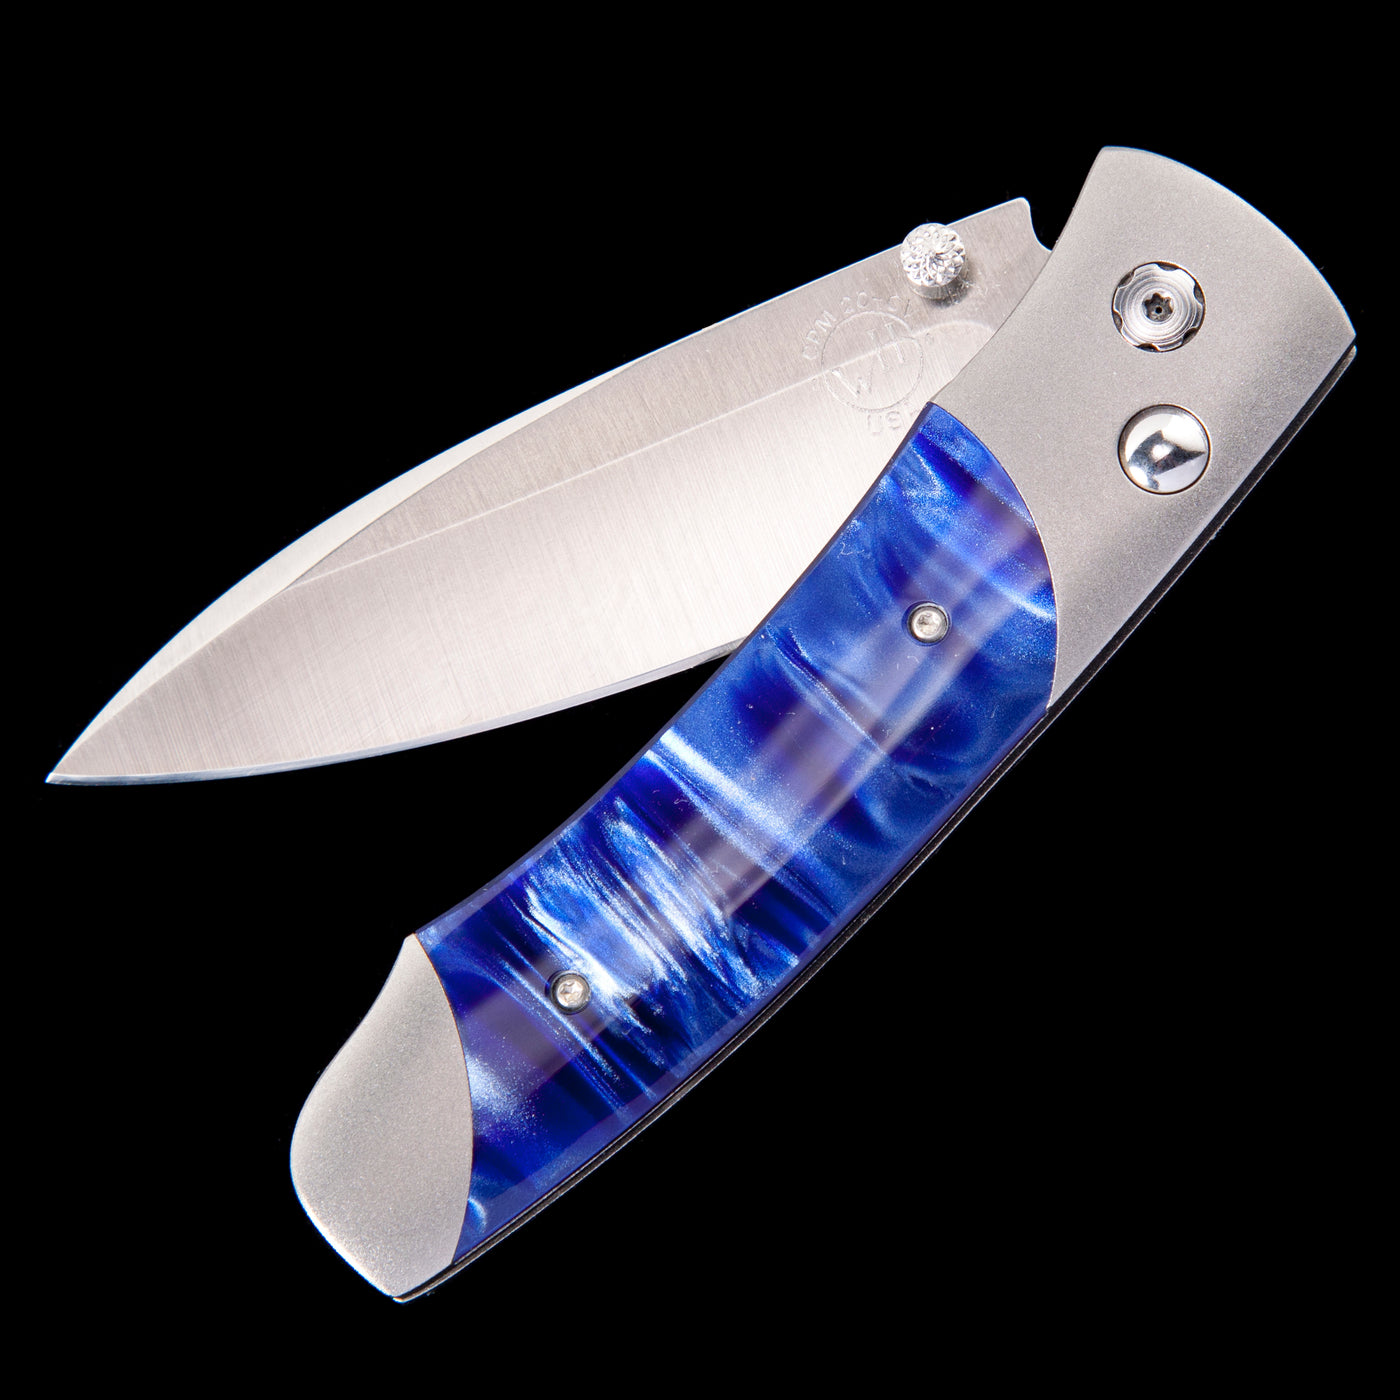 A200-2 Knife by William Henry Studio